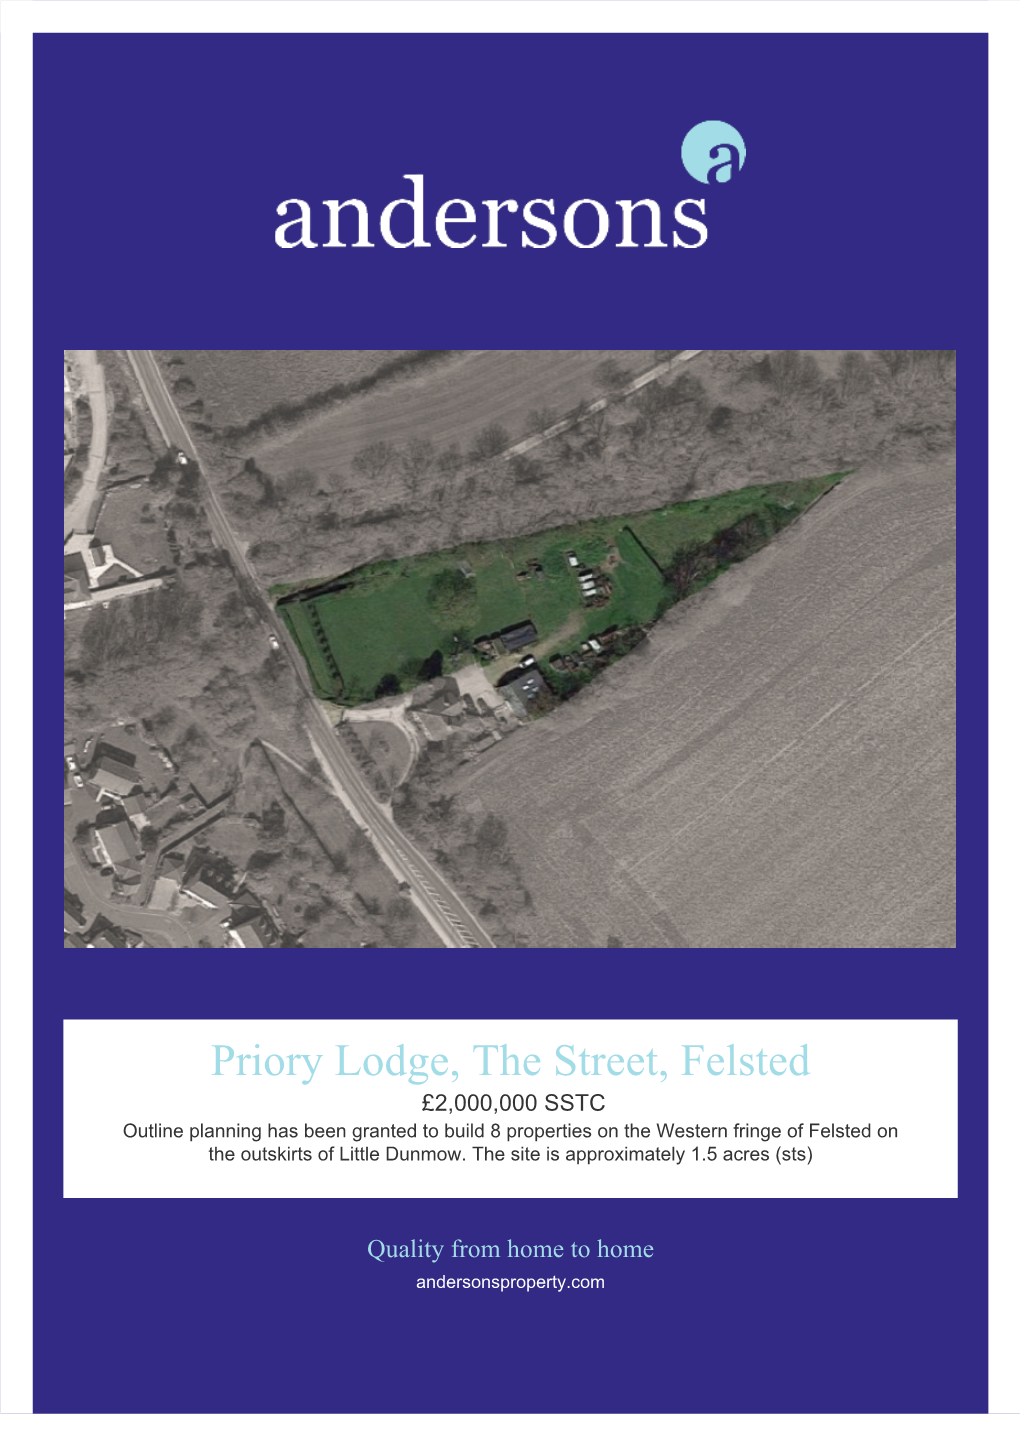 Priory Lodge, the Street, Felsted £2,000,000 SSTC Outline Planning Has Been Granted to Build 8 Properties on the Western Fringe of Felsted On